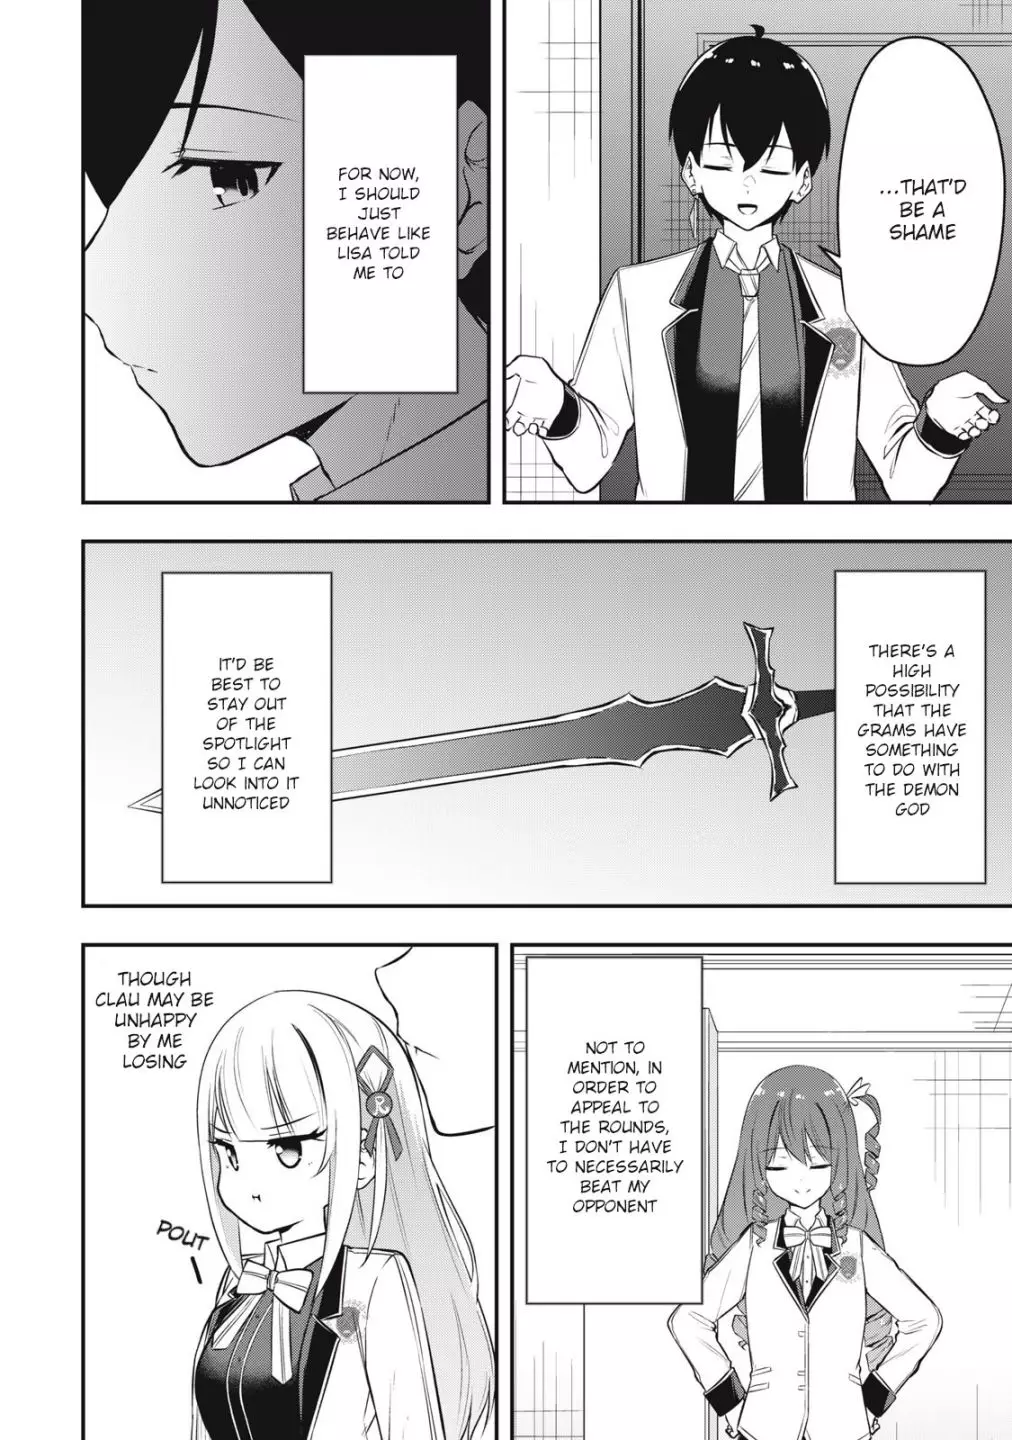 The Last Sage Of The Imperial Sword Academy - 7 page 6-799ae272